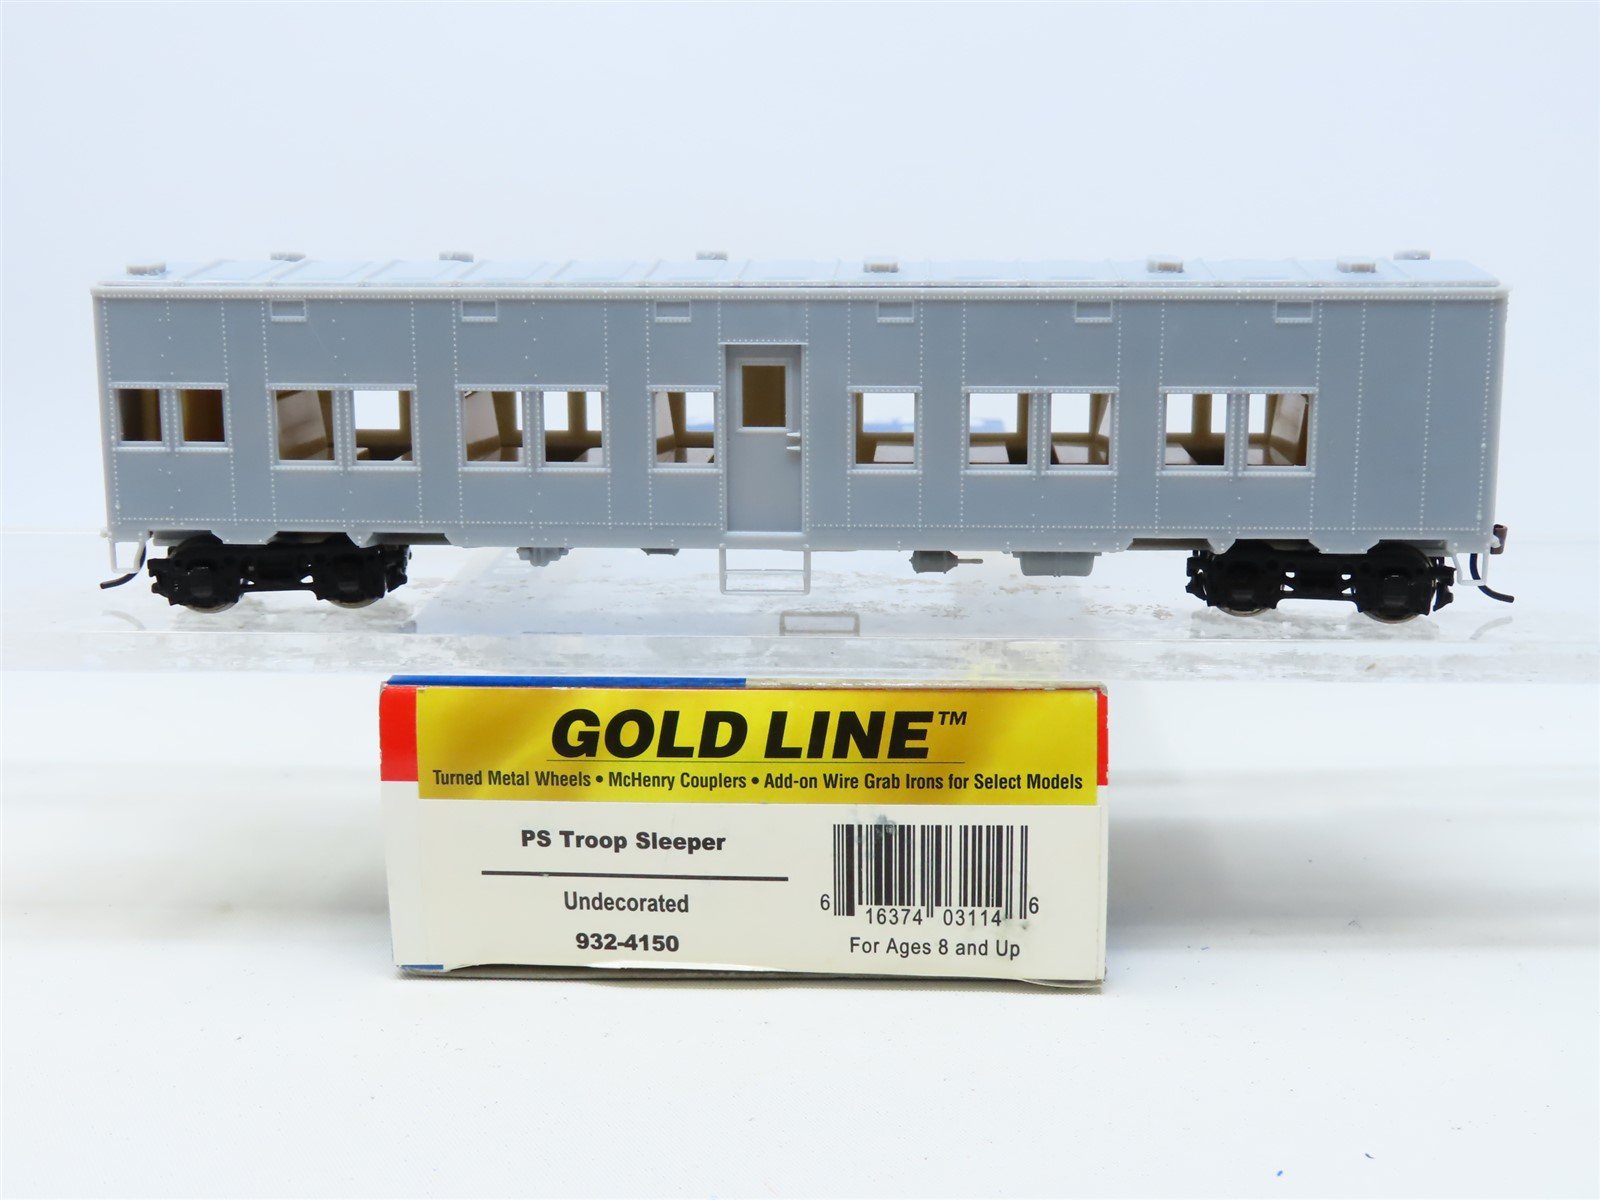 HO Scale Walthers Gold Line #932-4150 Undecorated PS Troop Sleeper Passenger Car